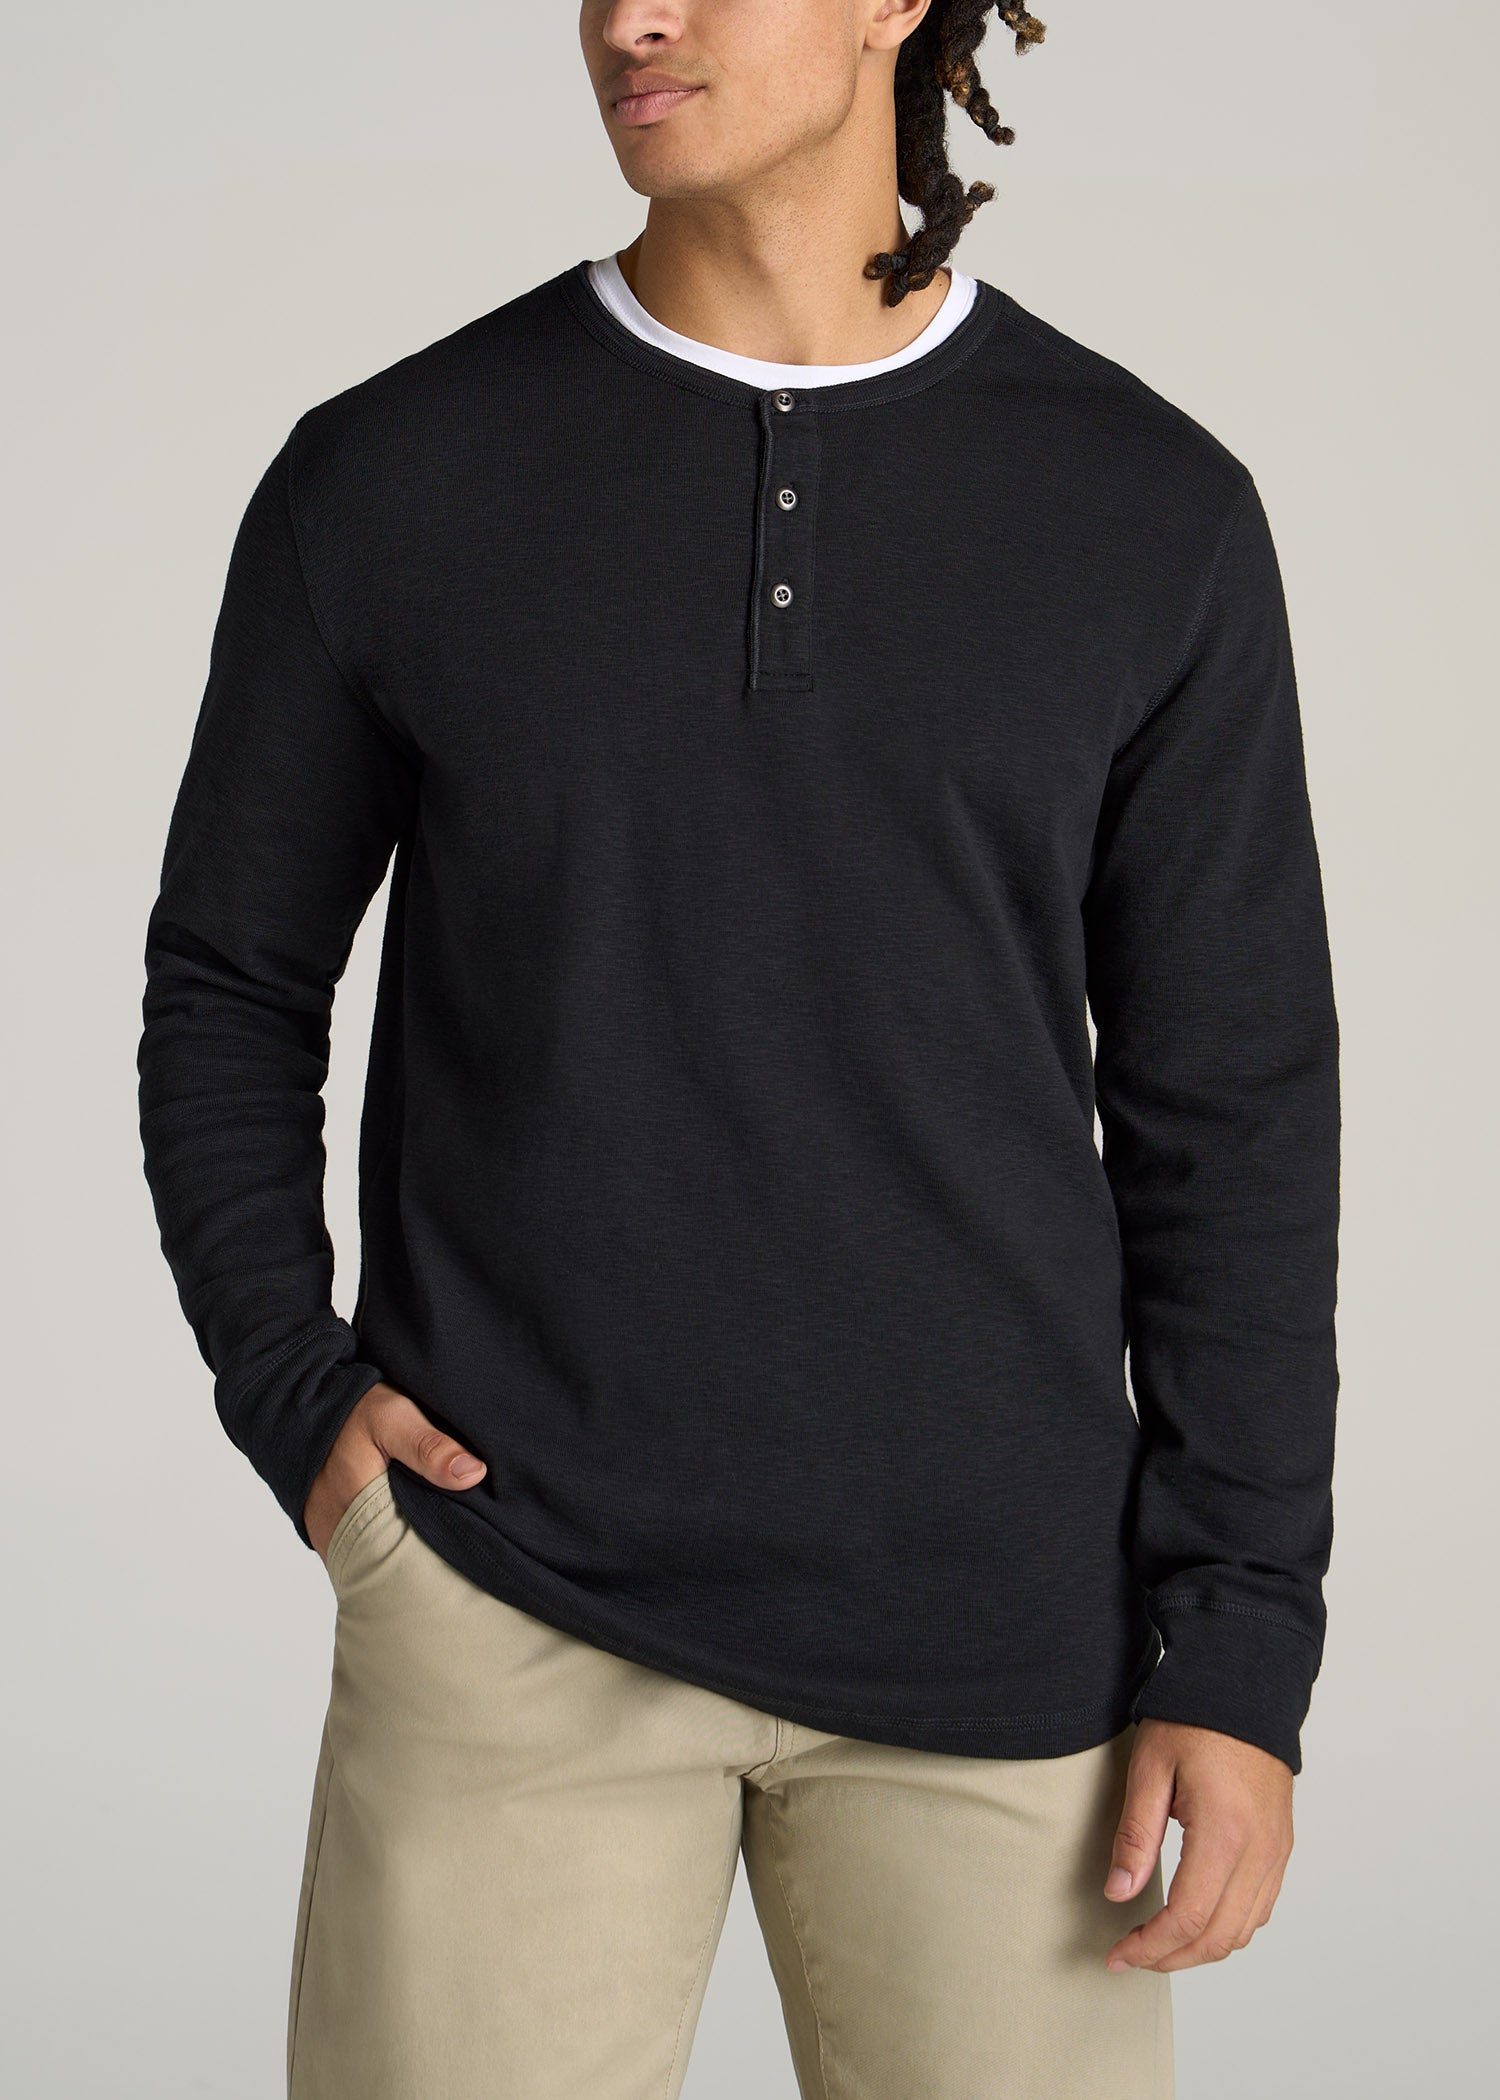 Long Sleeve Tall Henley T-Shirt (Also Available in Extra Tall)